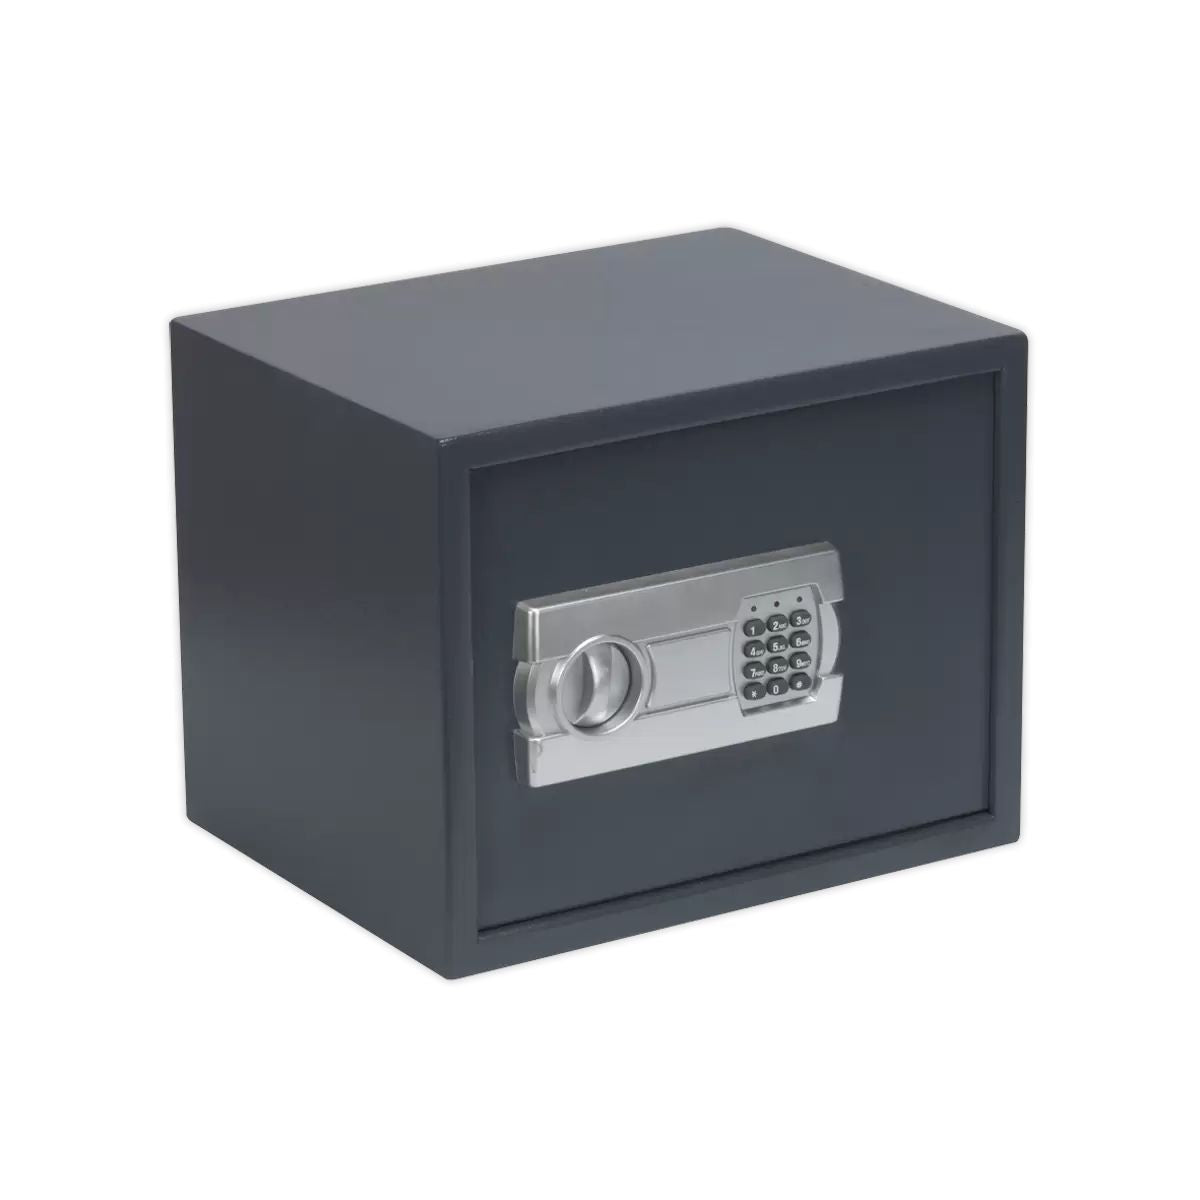 Sealey SECS02 Electronic Combination Security Safe